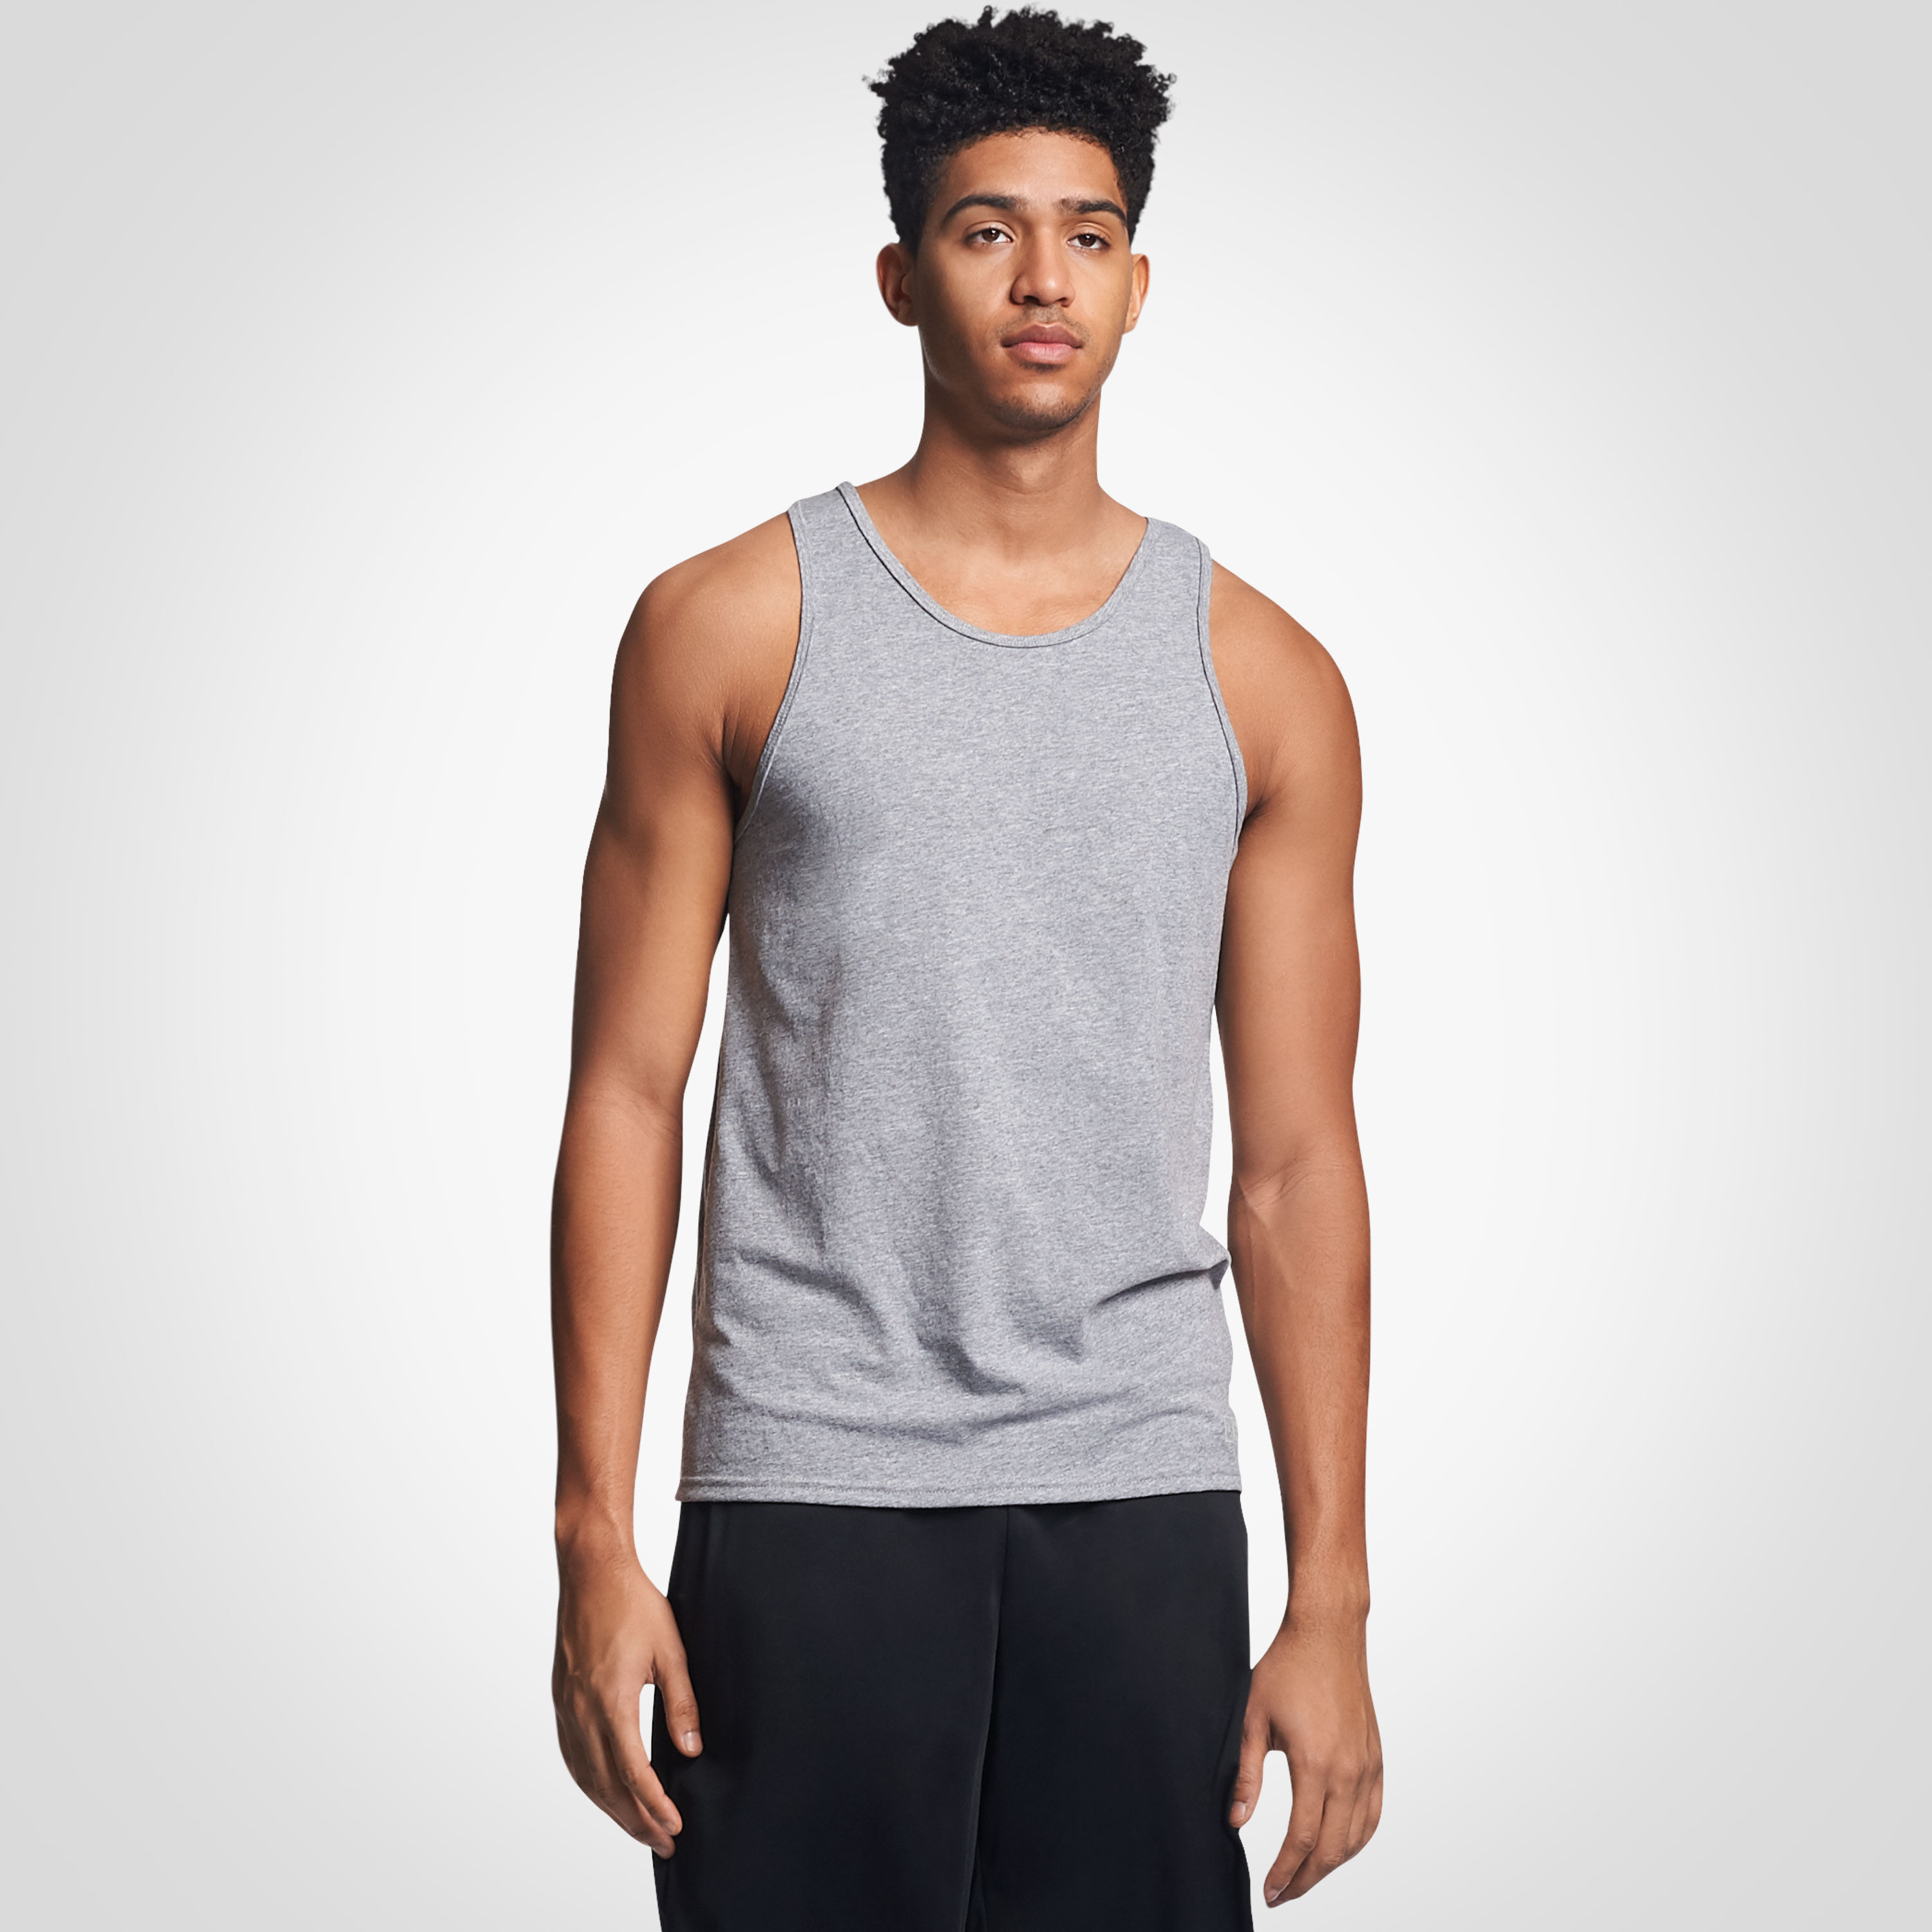 men's russell training fit shirts